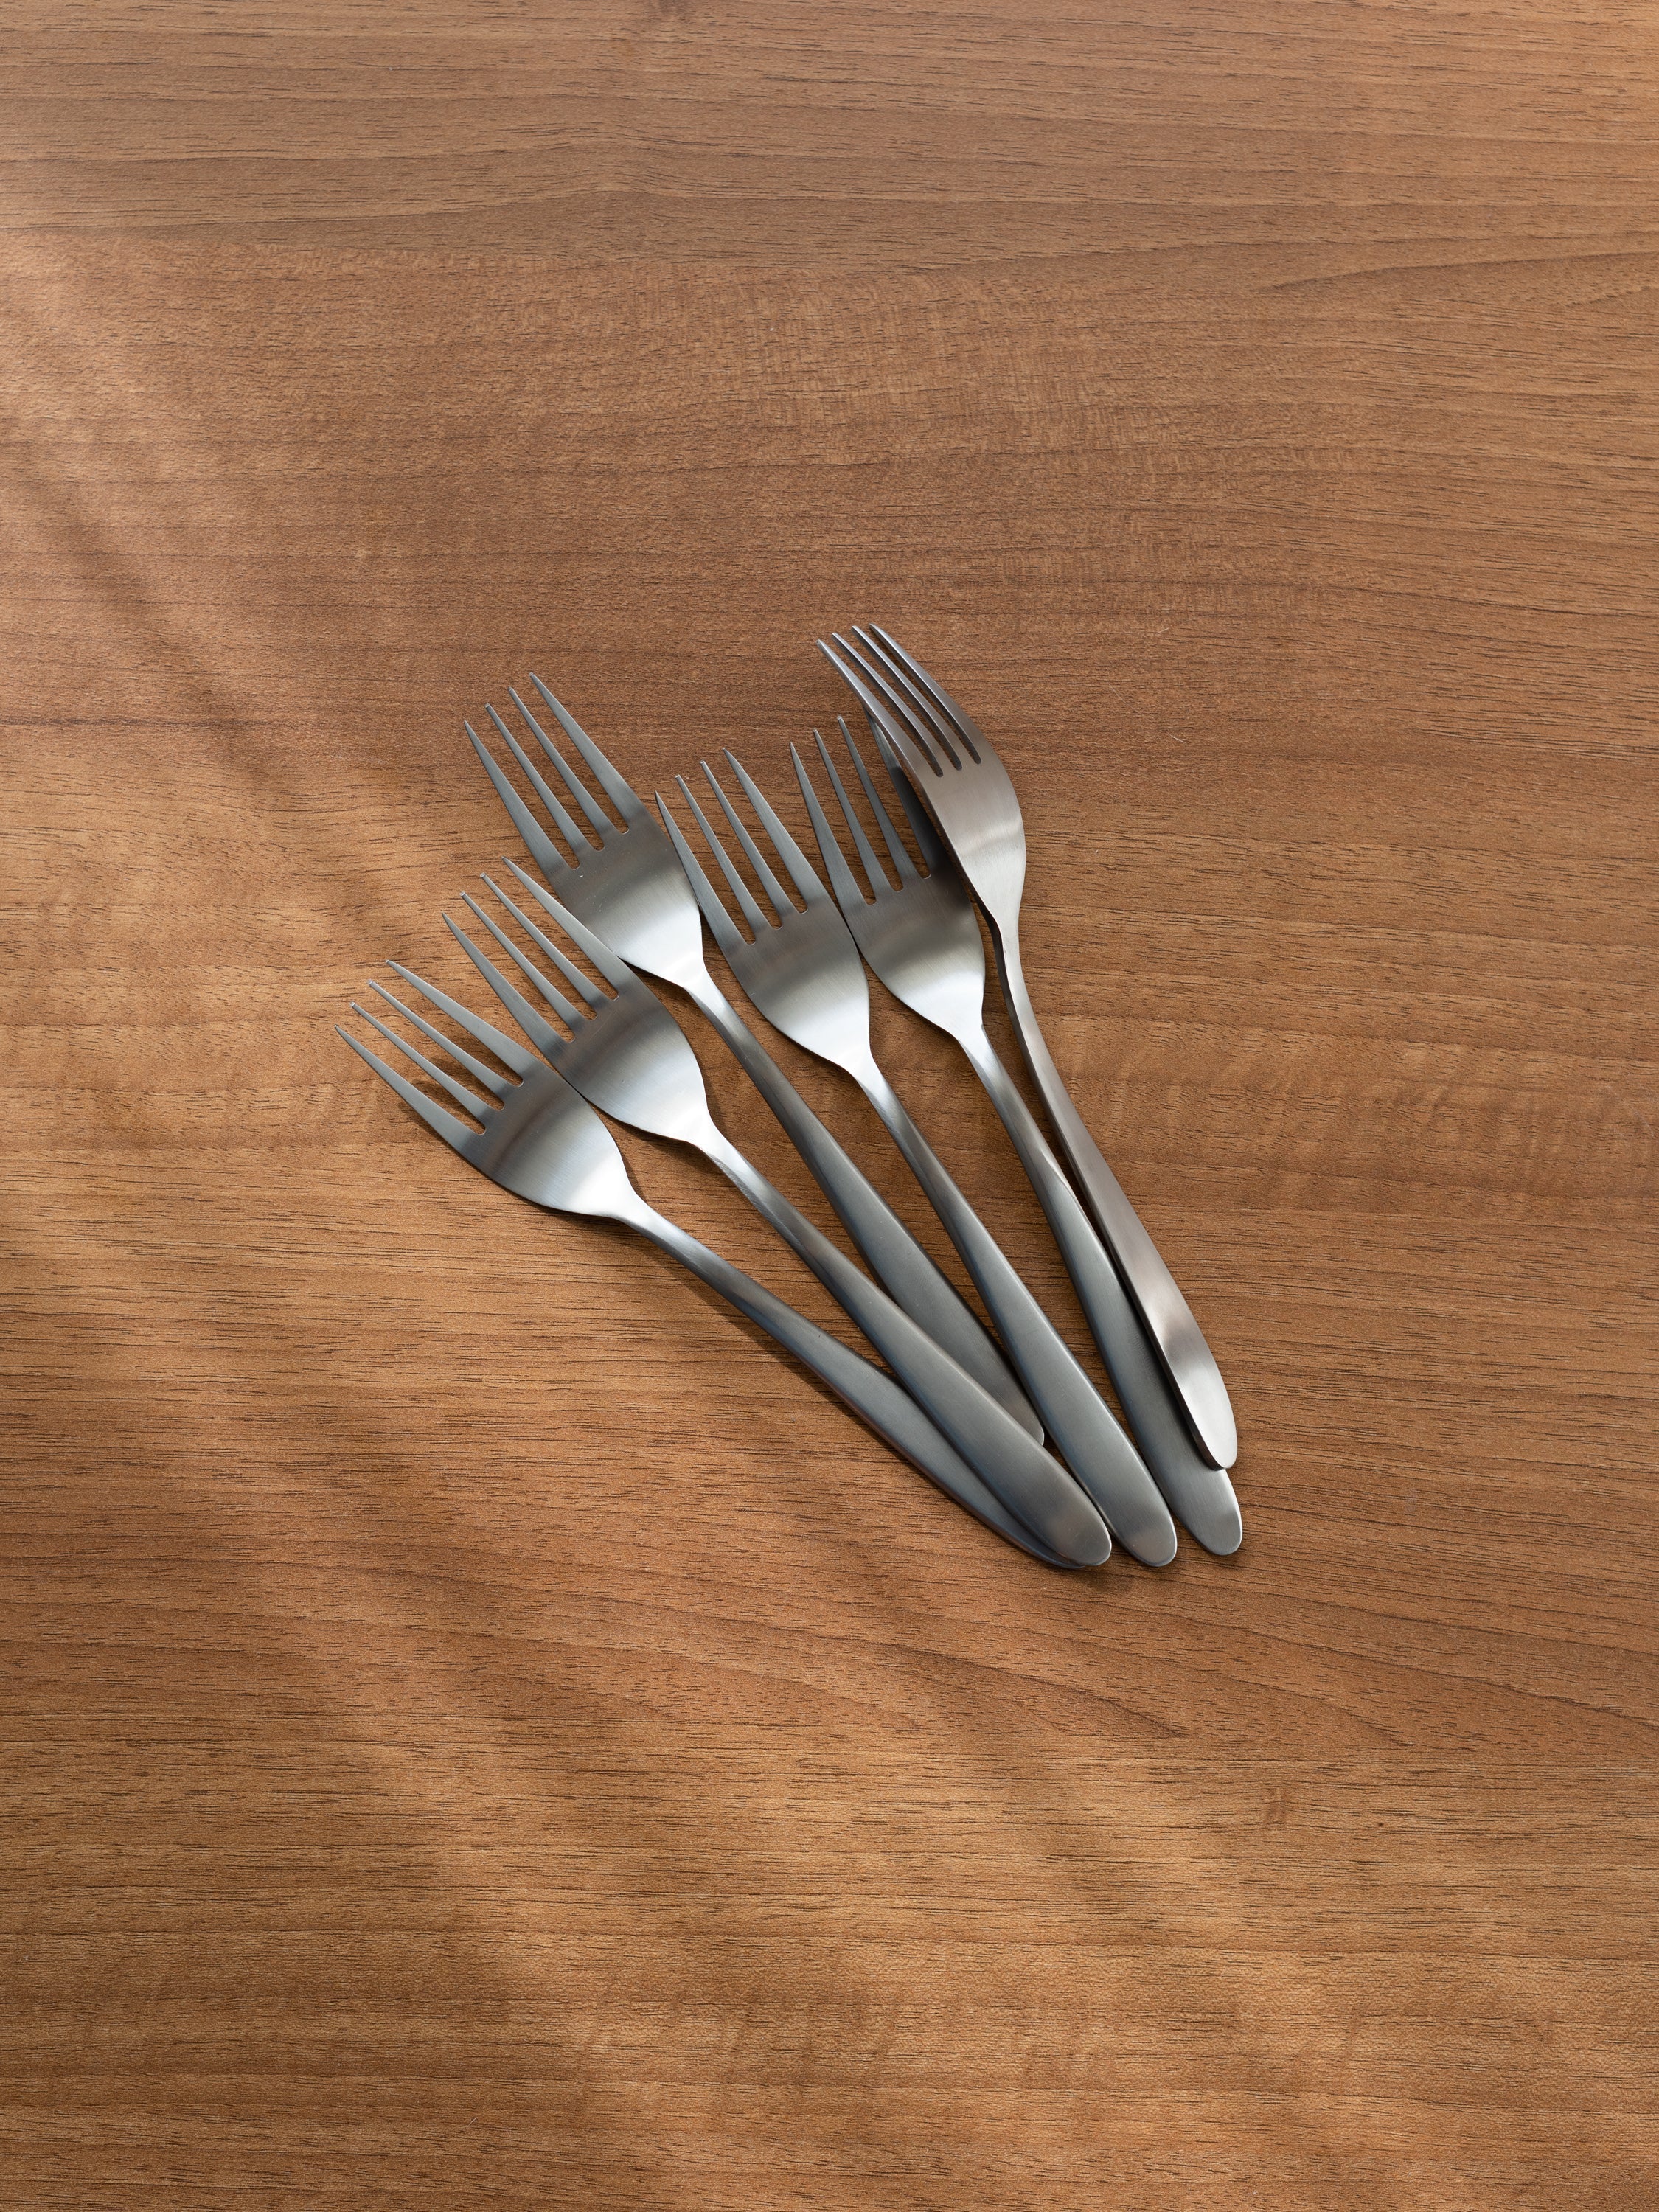 Willow high quality stainless steel dinner forks by Fleck